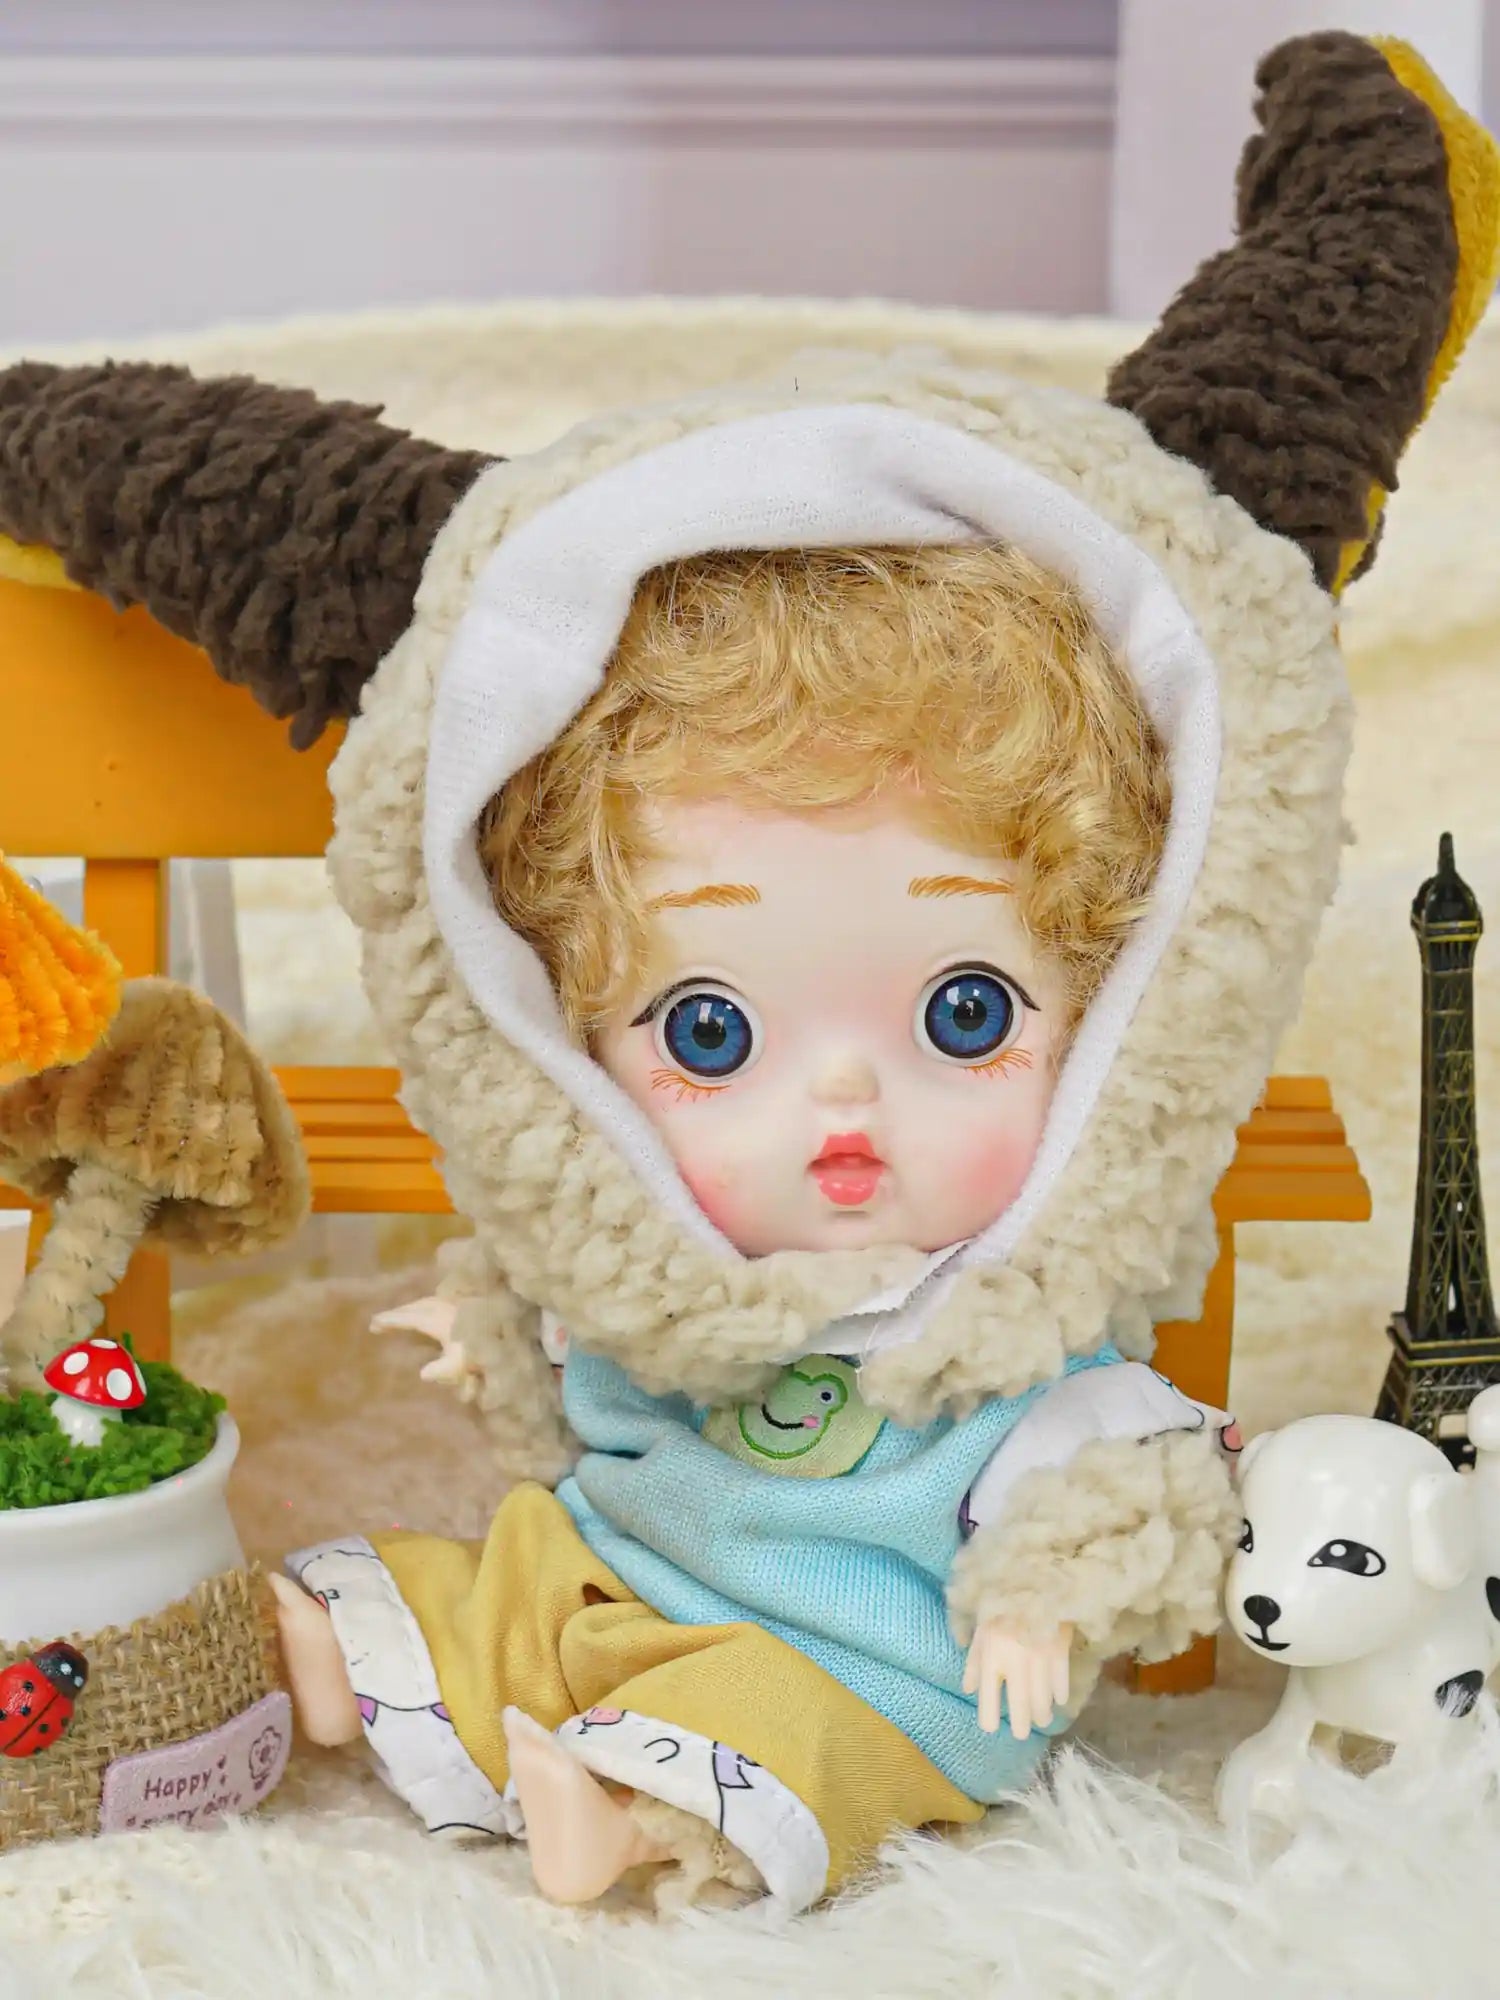 A BJD with bright blue eyes and lamb ears hood stands amidst a scene with a toy dog and a miniature Eiffel Tower.